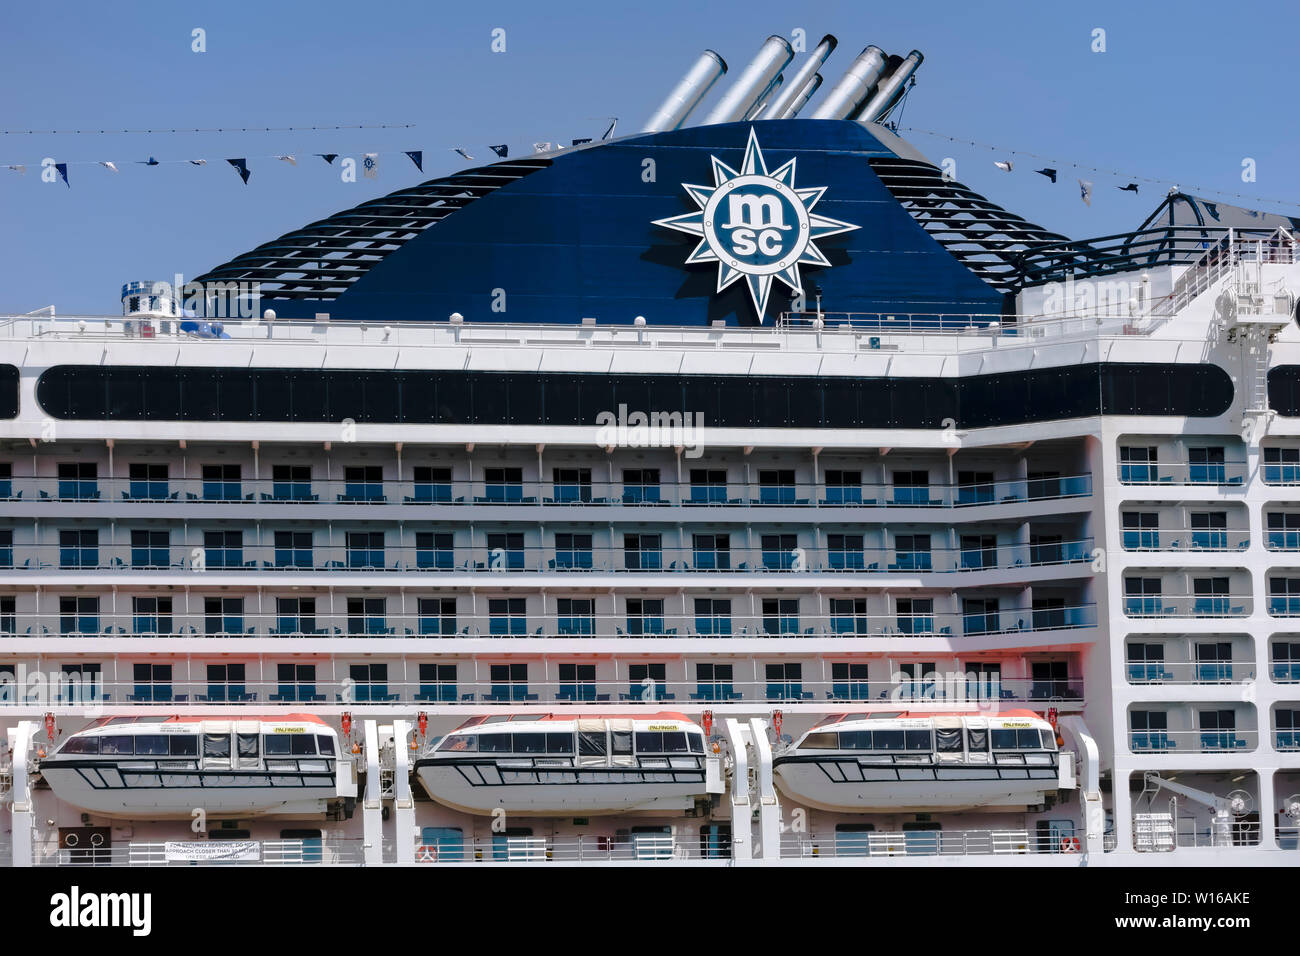 MSC Musica cruise ship, detail, close up. Summer vacations. Ship transport. Sunny day, clear blue sky. Stock Photo